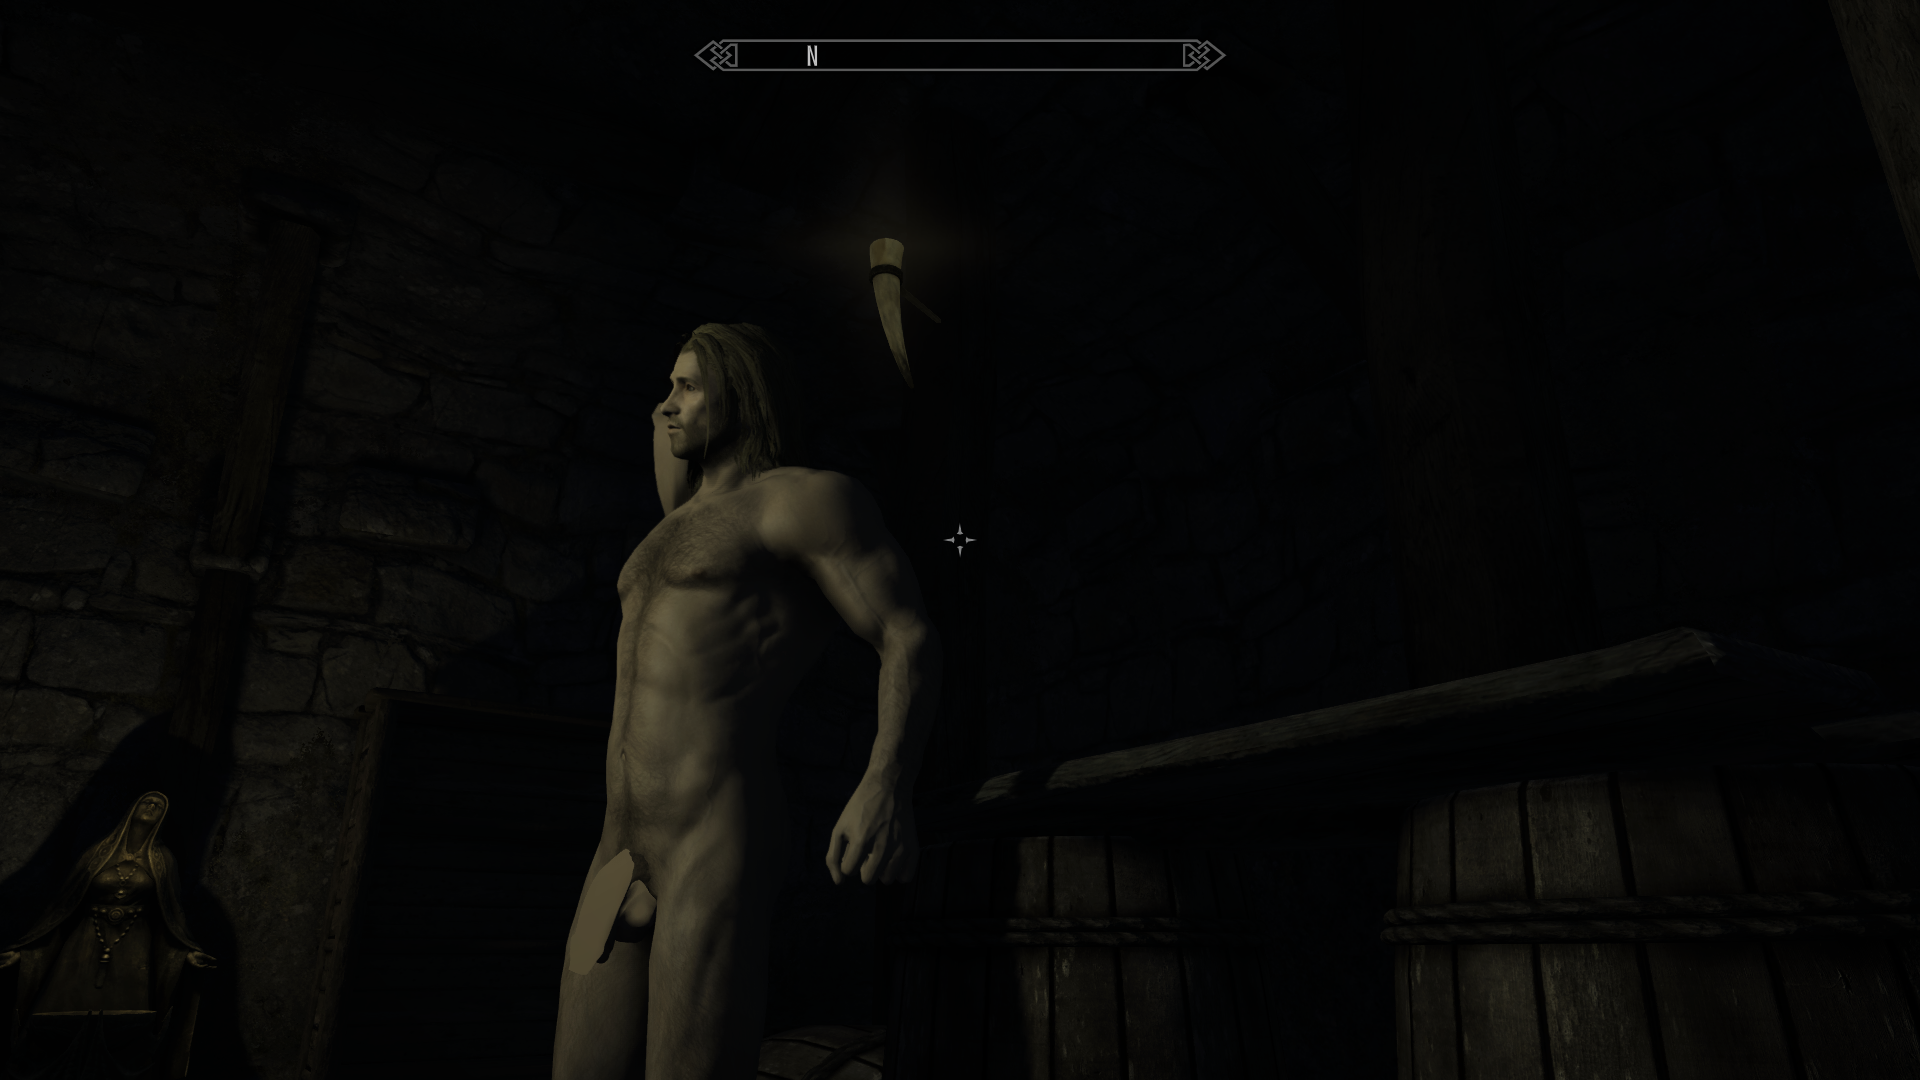 1428322023_SkyrimSE2021-12-0713-20-06.png.bf05198e5e79bc9646f71932d8686bb5.png